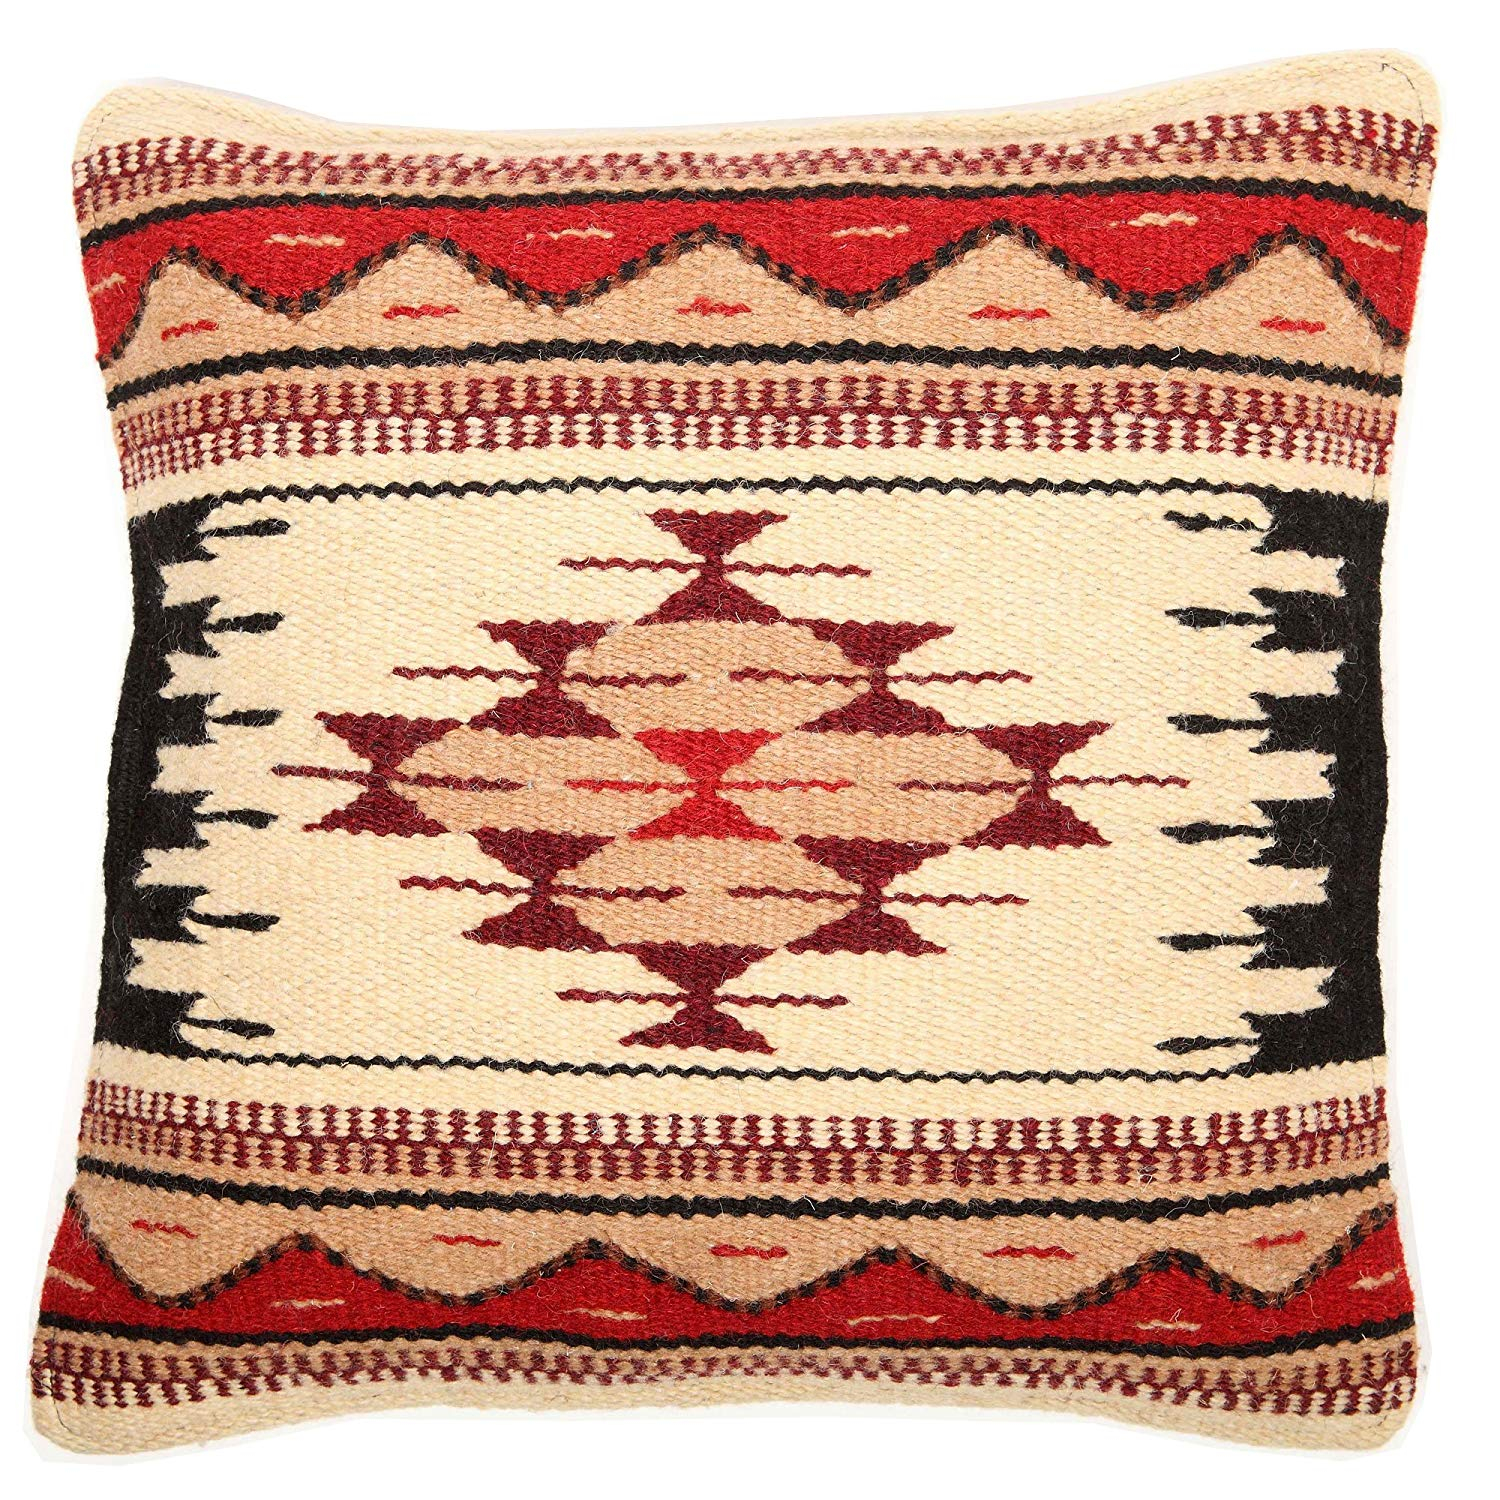 Native American Embroidery Patterns Cheap Hand Embroidery Designs For Pillow Covers Find Hand